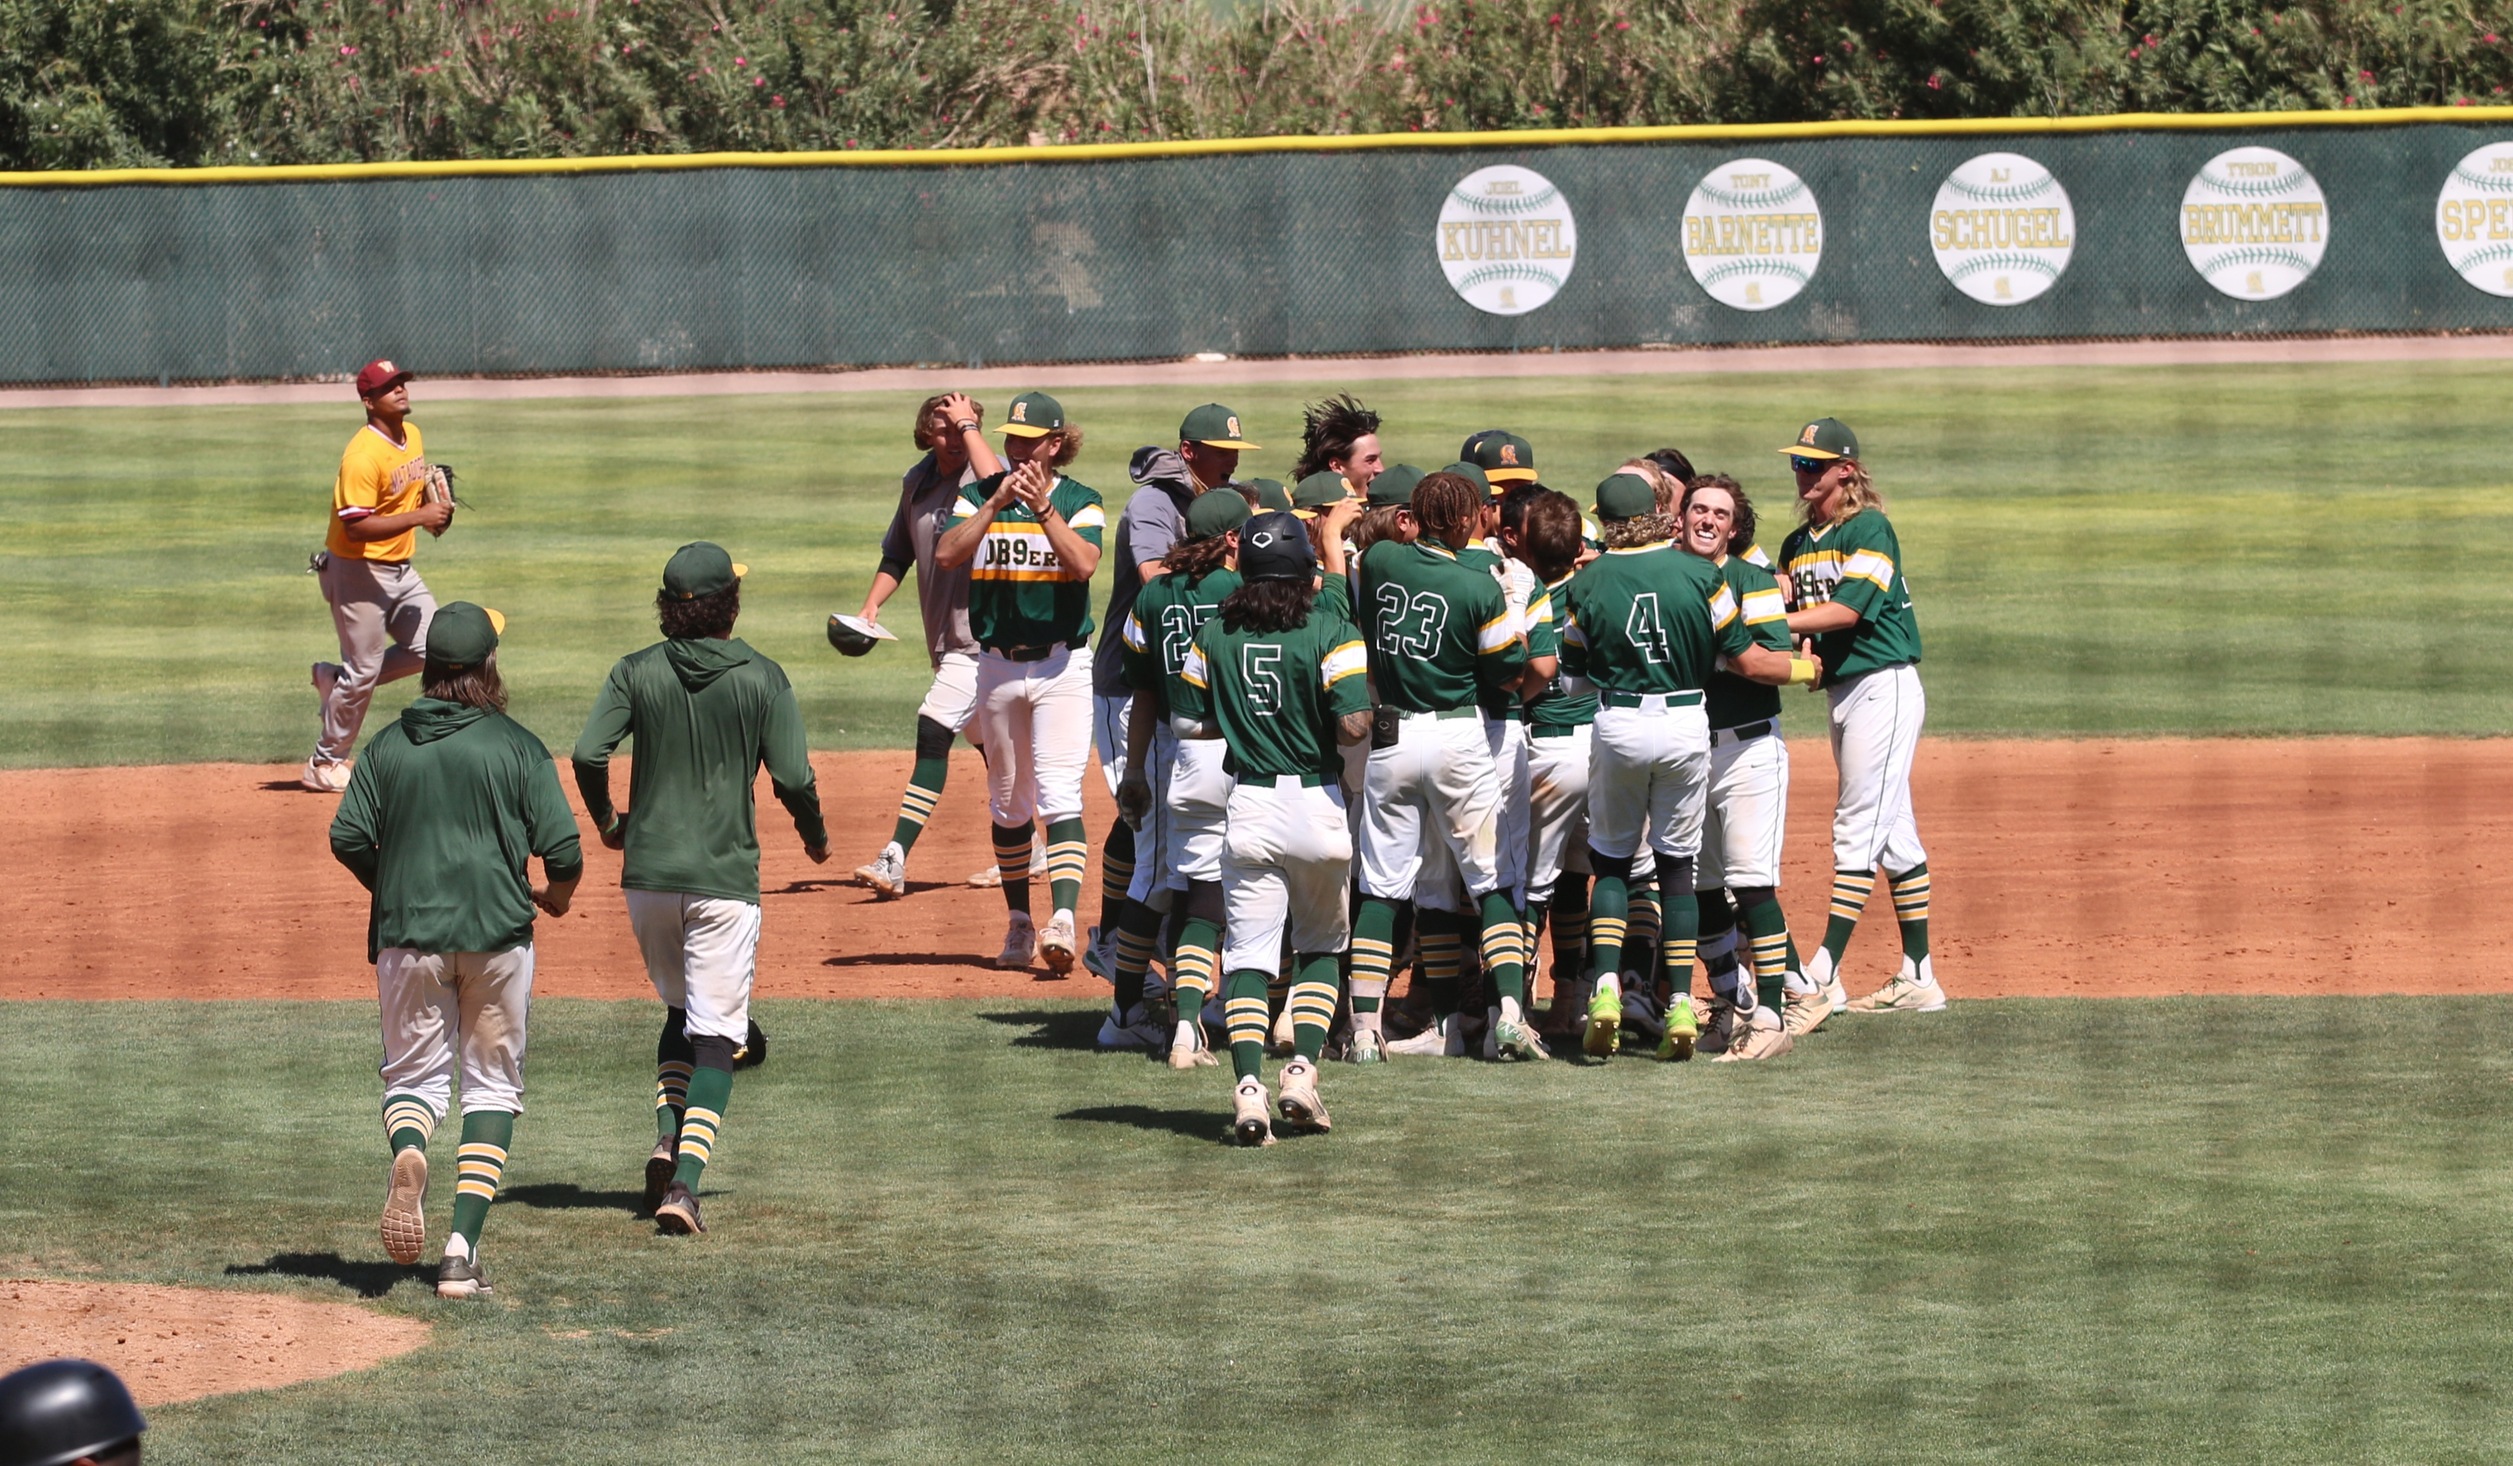 Celebration after game one 3-2 win over Western Arizona in extras Saturday at McSwain field.